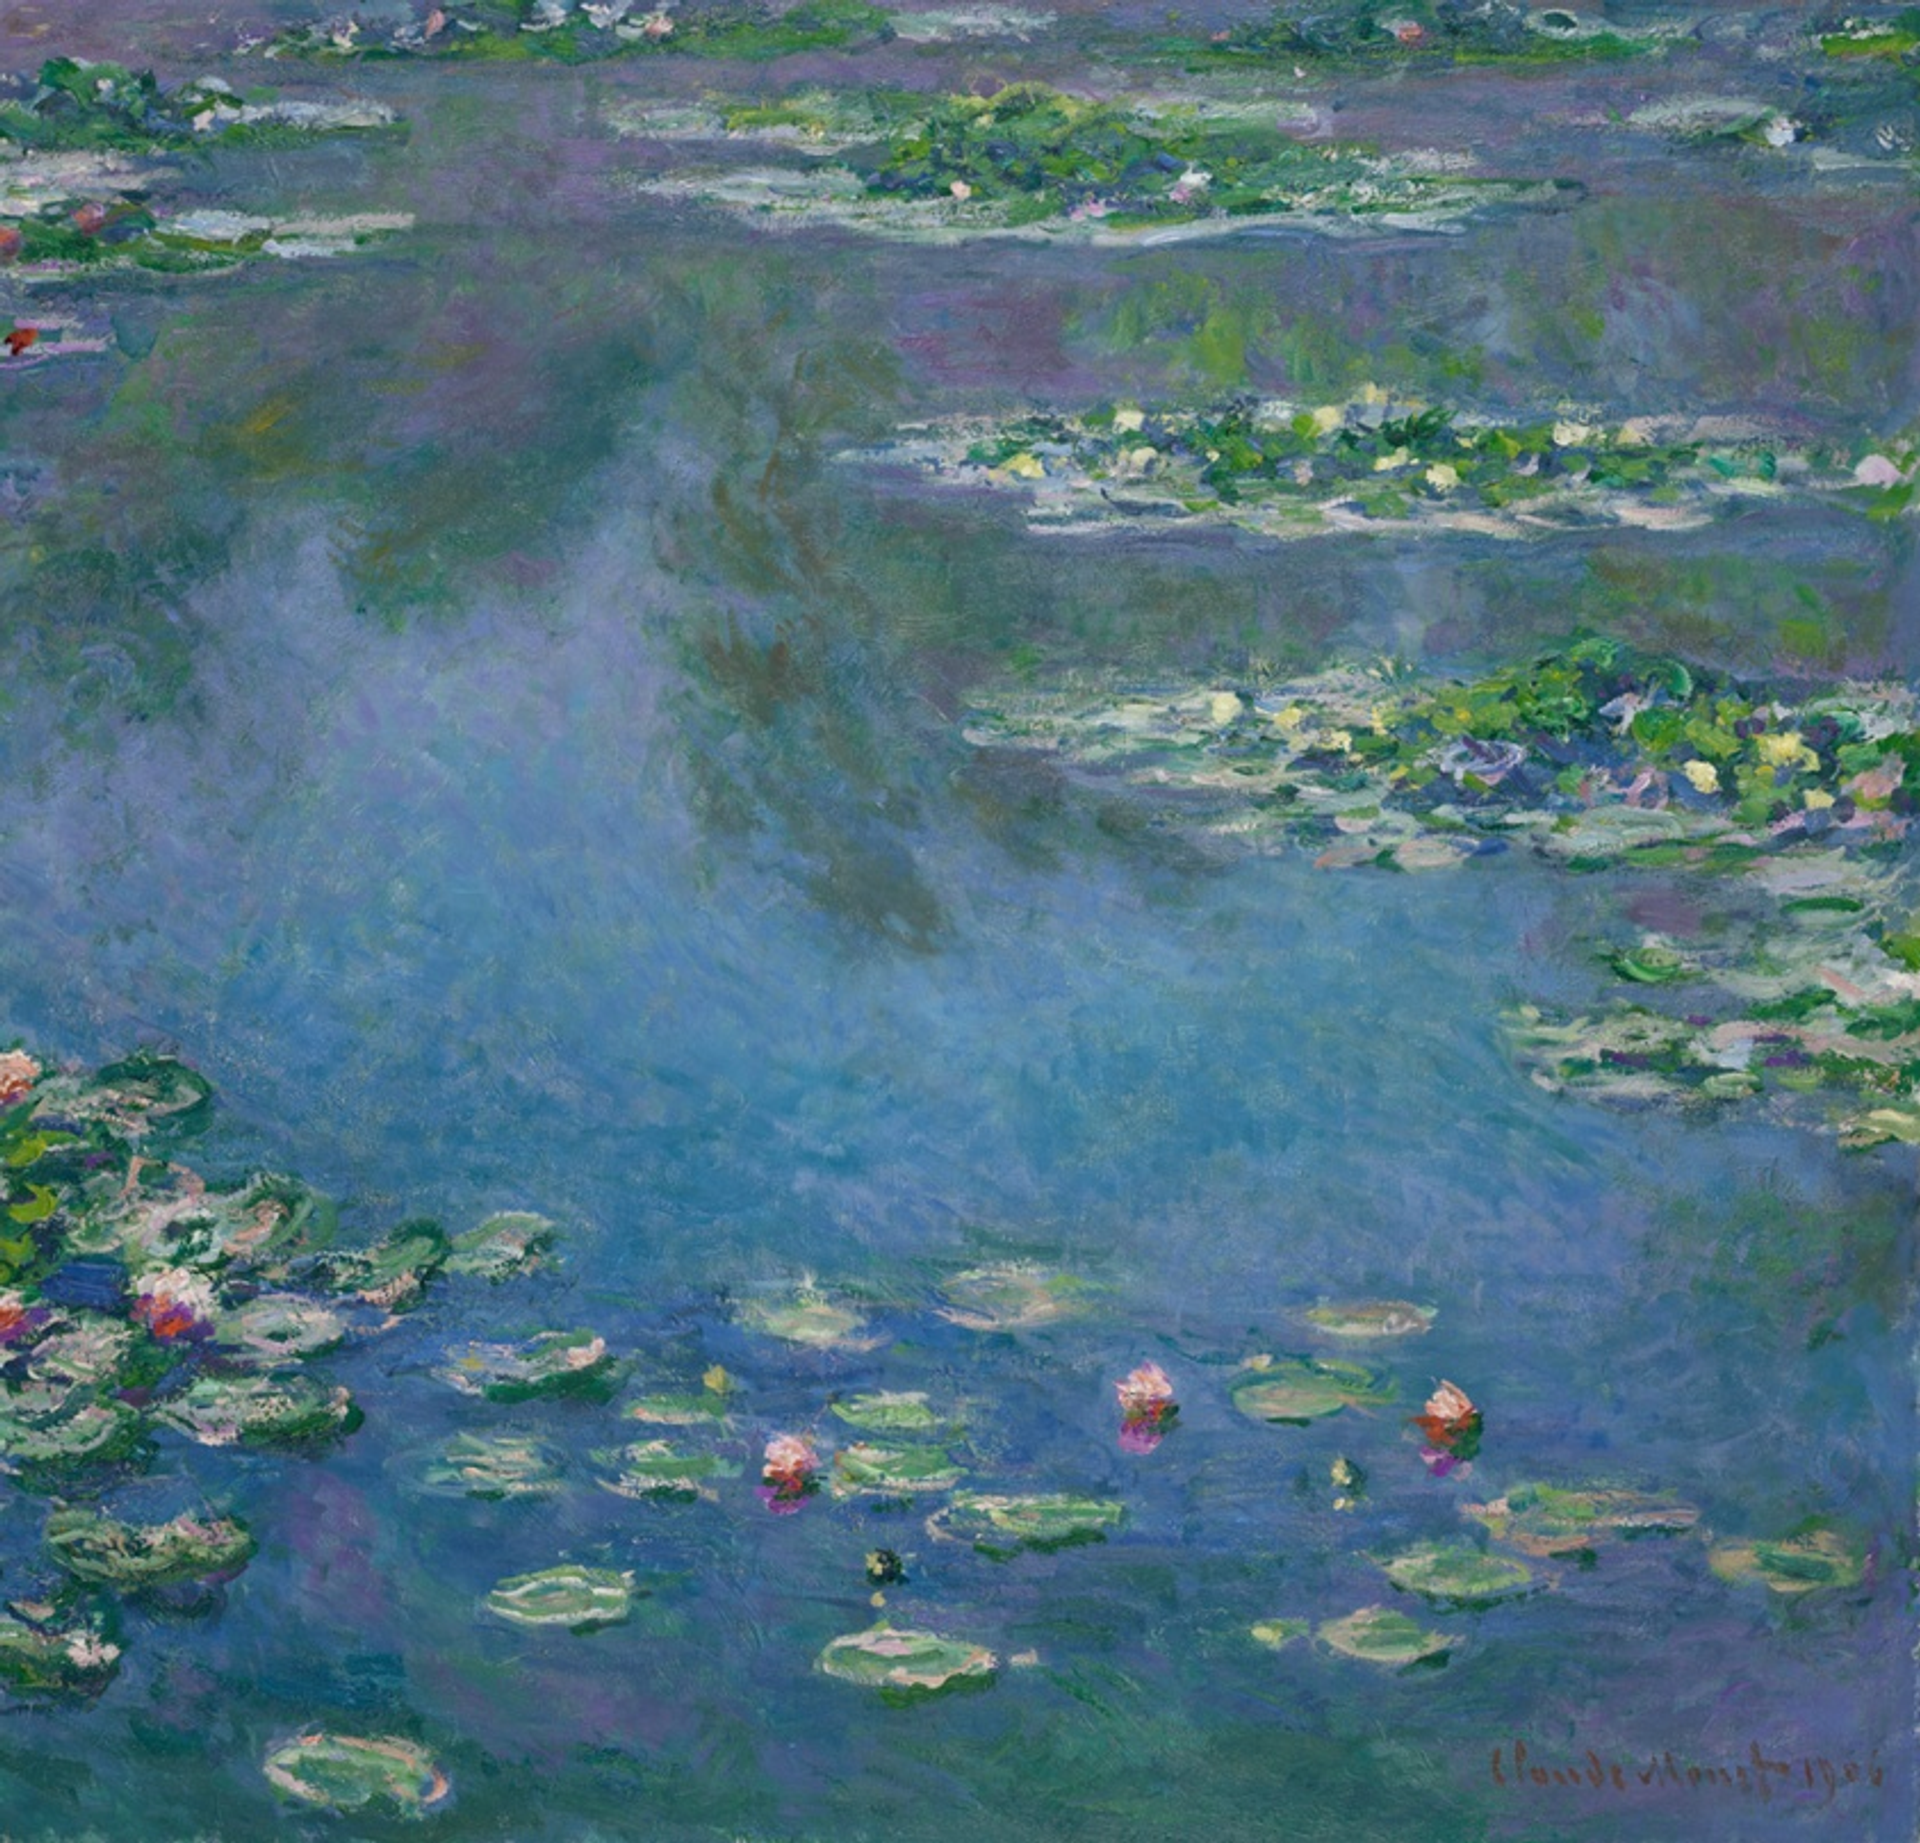 An image of Claude Monet's Water Lilies. Depicted in his typical Impressionist style, the flowers are shown floating in a reflective pond.